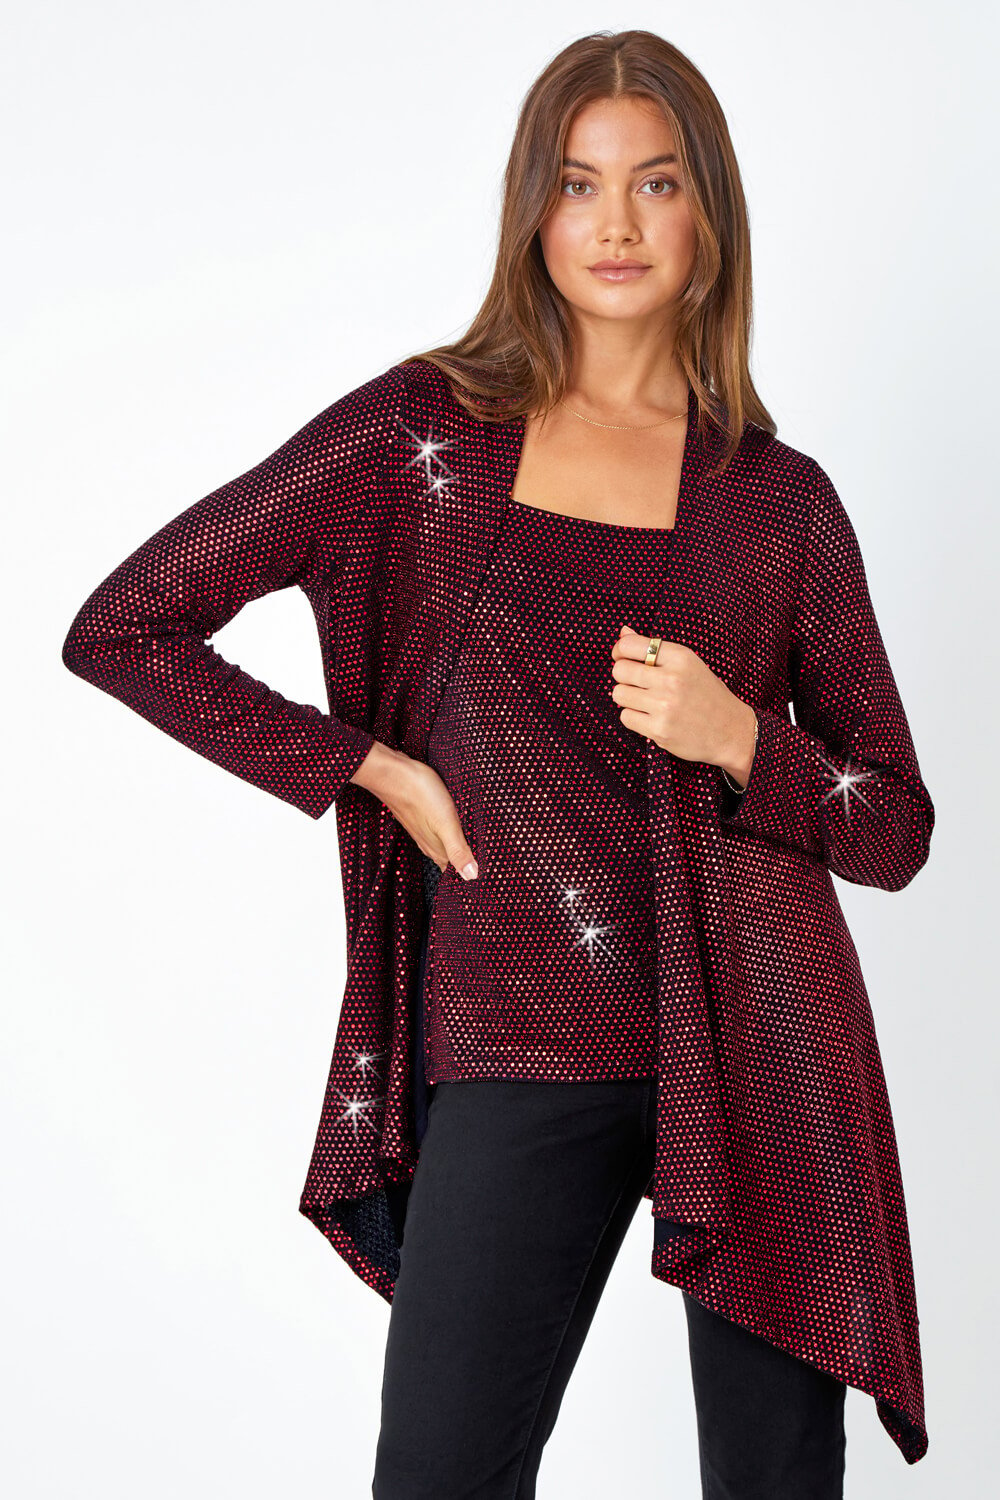 Red Sequin Sparkle Waterfall Stretch Jacket, Image 2 of 5